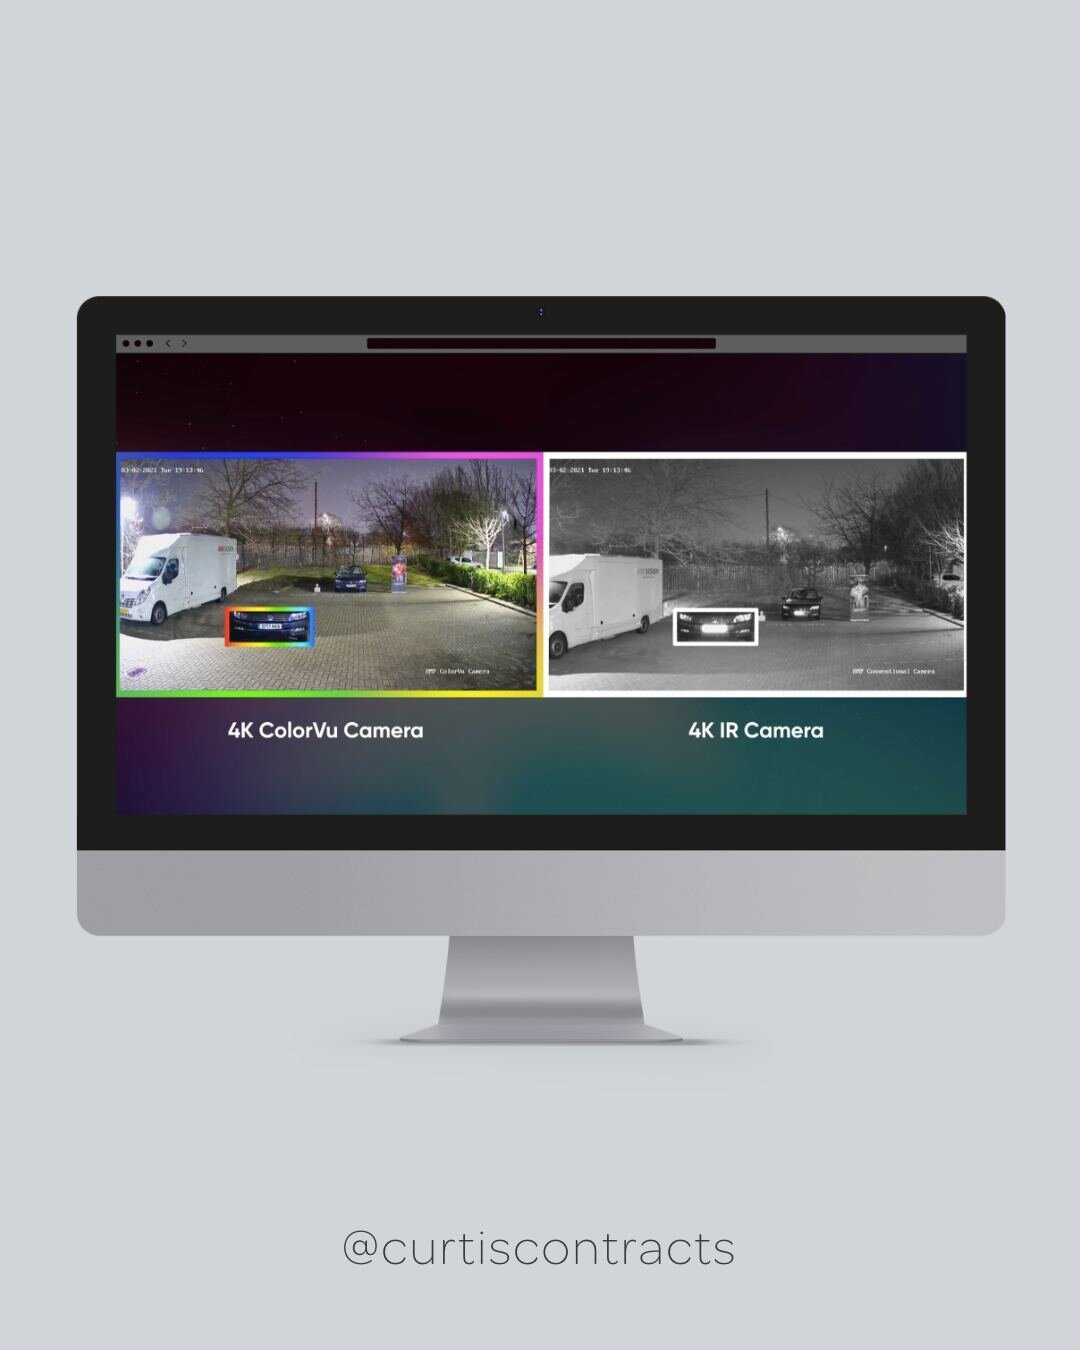 Introducing 24/7 colour images for CCTV. This is revolutionary in the world of security and the picture quality is so much more clear and detailed. Trust your safety is in even better hands.⁠
⁠
Get in touch for more information.⁠
⁠
Master Licence No.